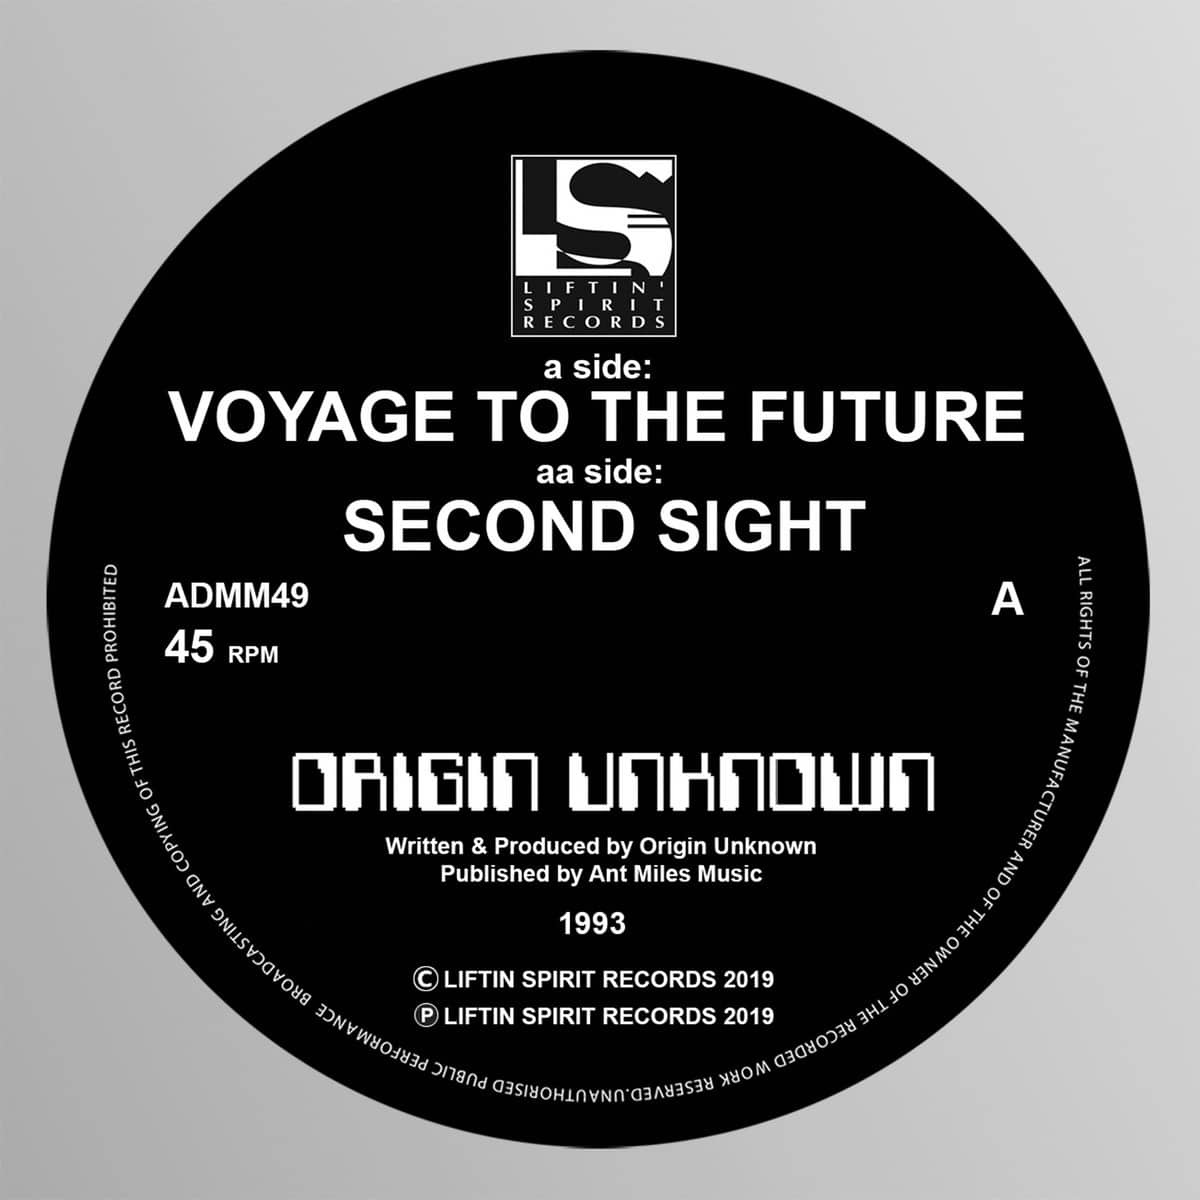 Origin Unknown - Voyage To The Future / Second Sight - ADMM49 - LIFTIN' SPIRIT RECORDS